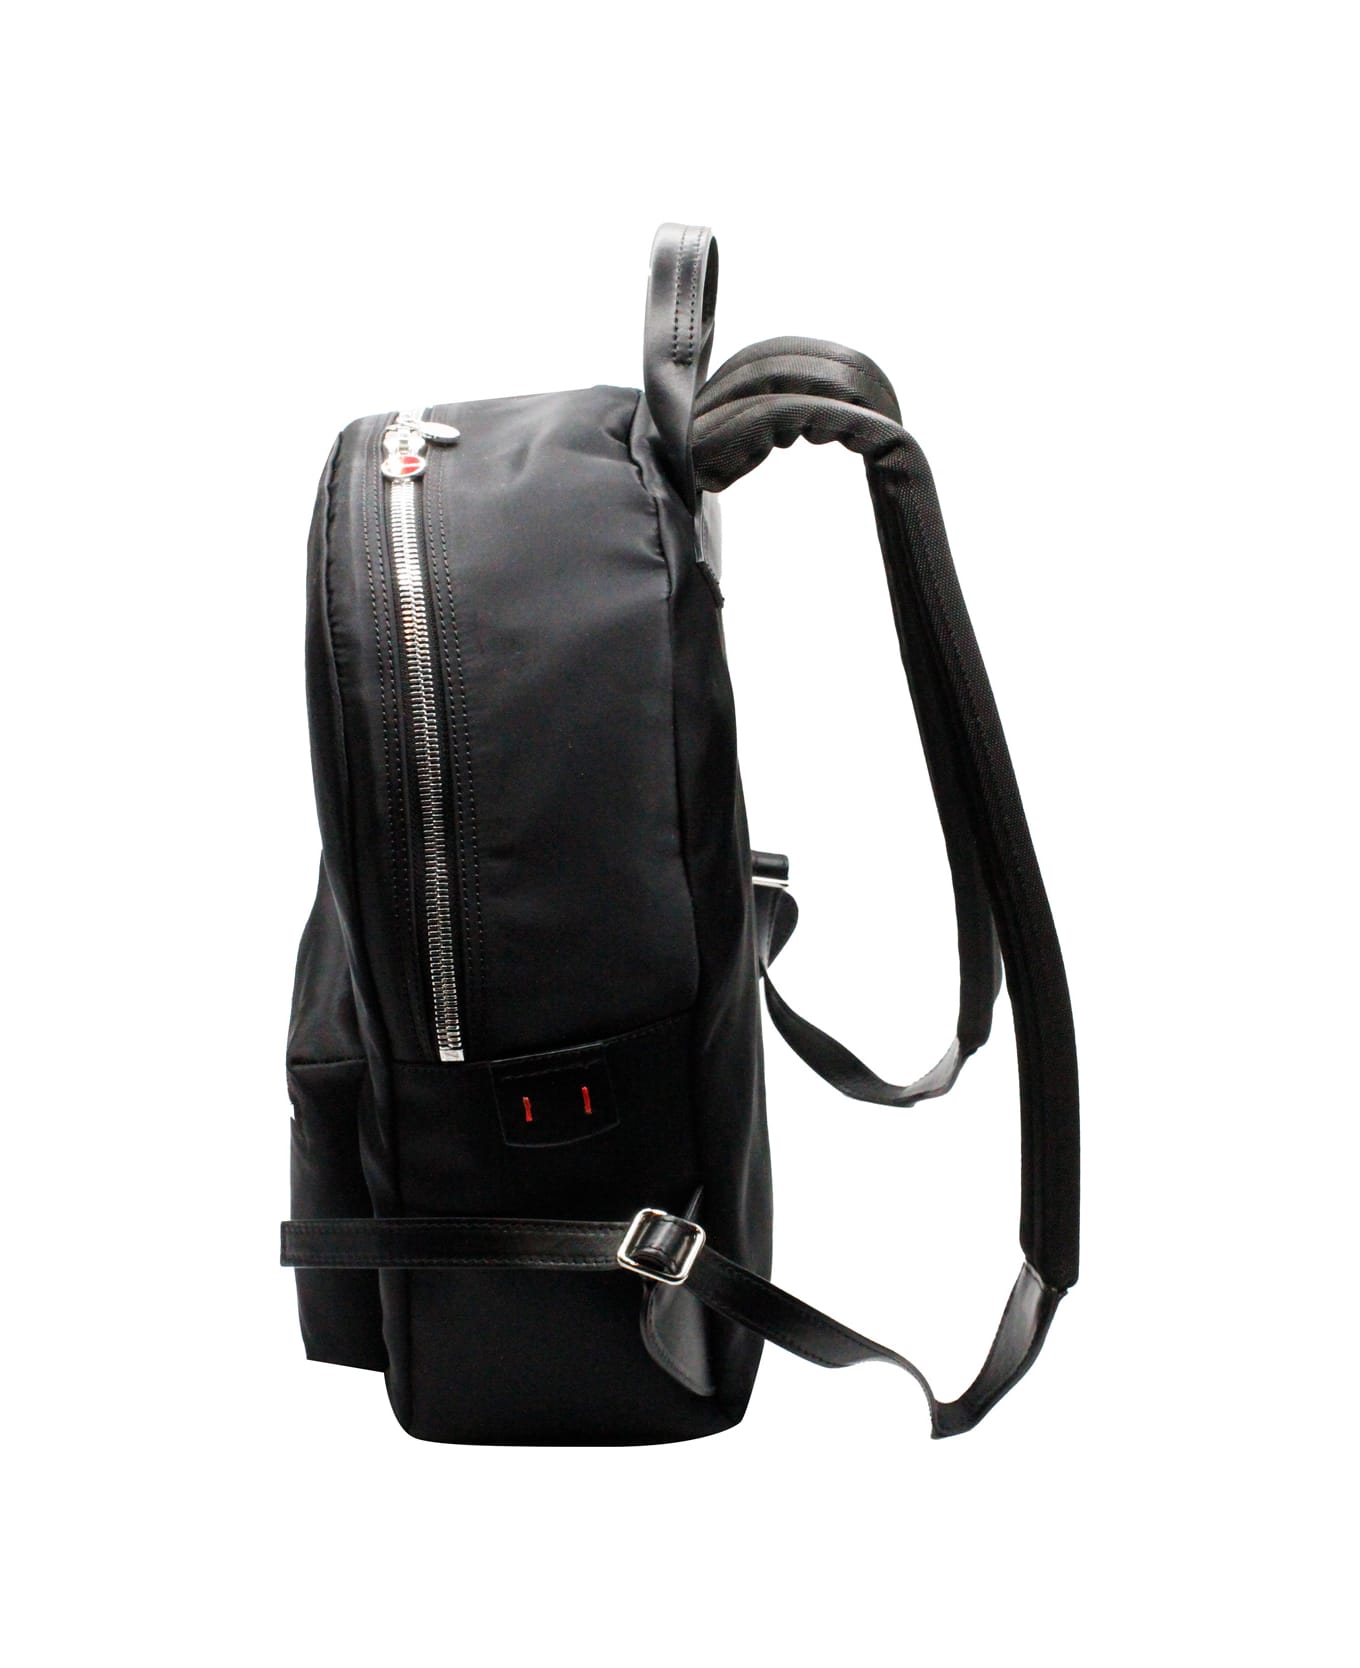 Kiton Backpack In Technical Fabric With Leather Inserts And Adjustable Shoulder Straps. Logo On The Front Pocket 40x33x15 Cm - Black